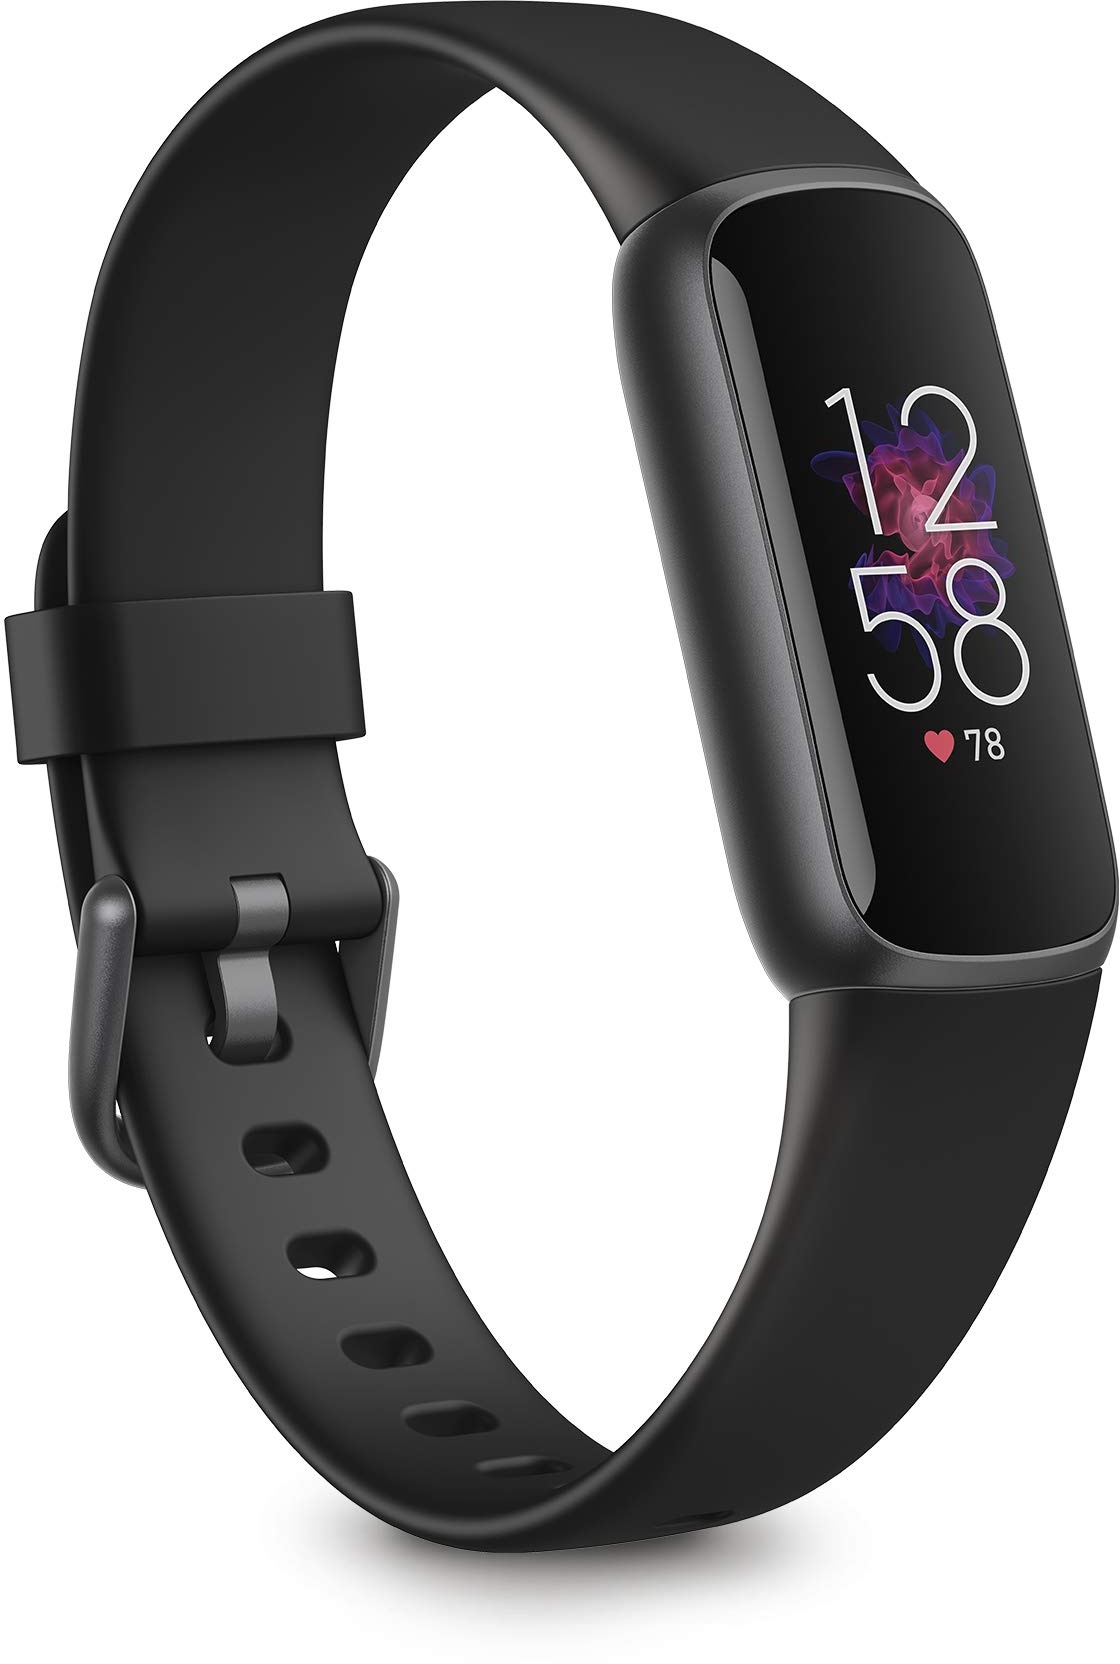 Fitbit Luxe Health & Fitness Tracker with 6-Month Fitbit Premium Membership Included, Stress Management Tools and up to 5 Days Battery, Black